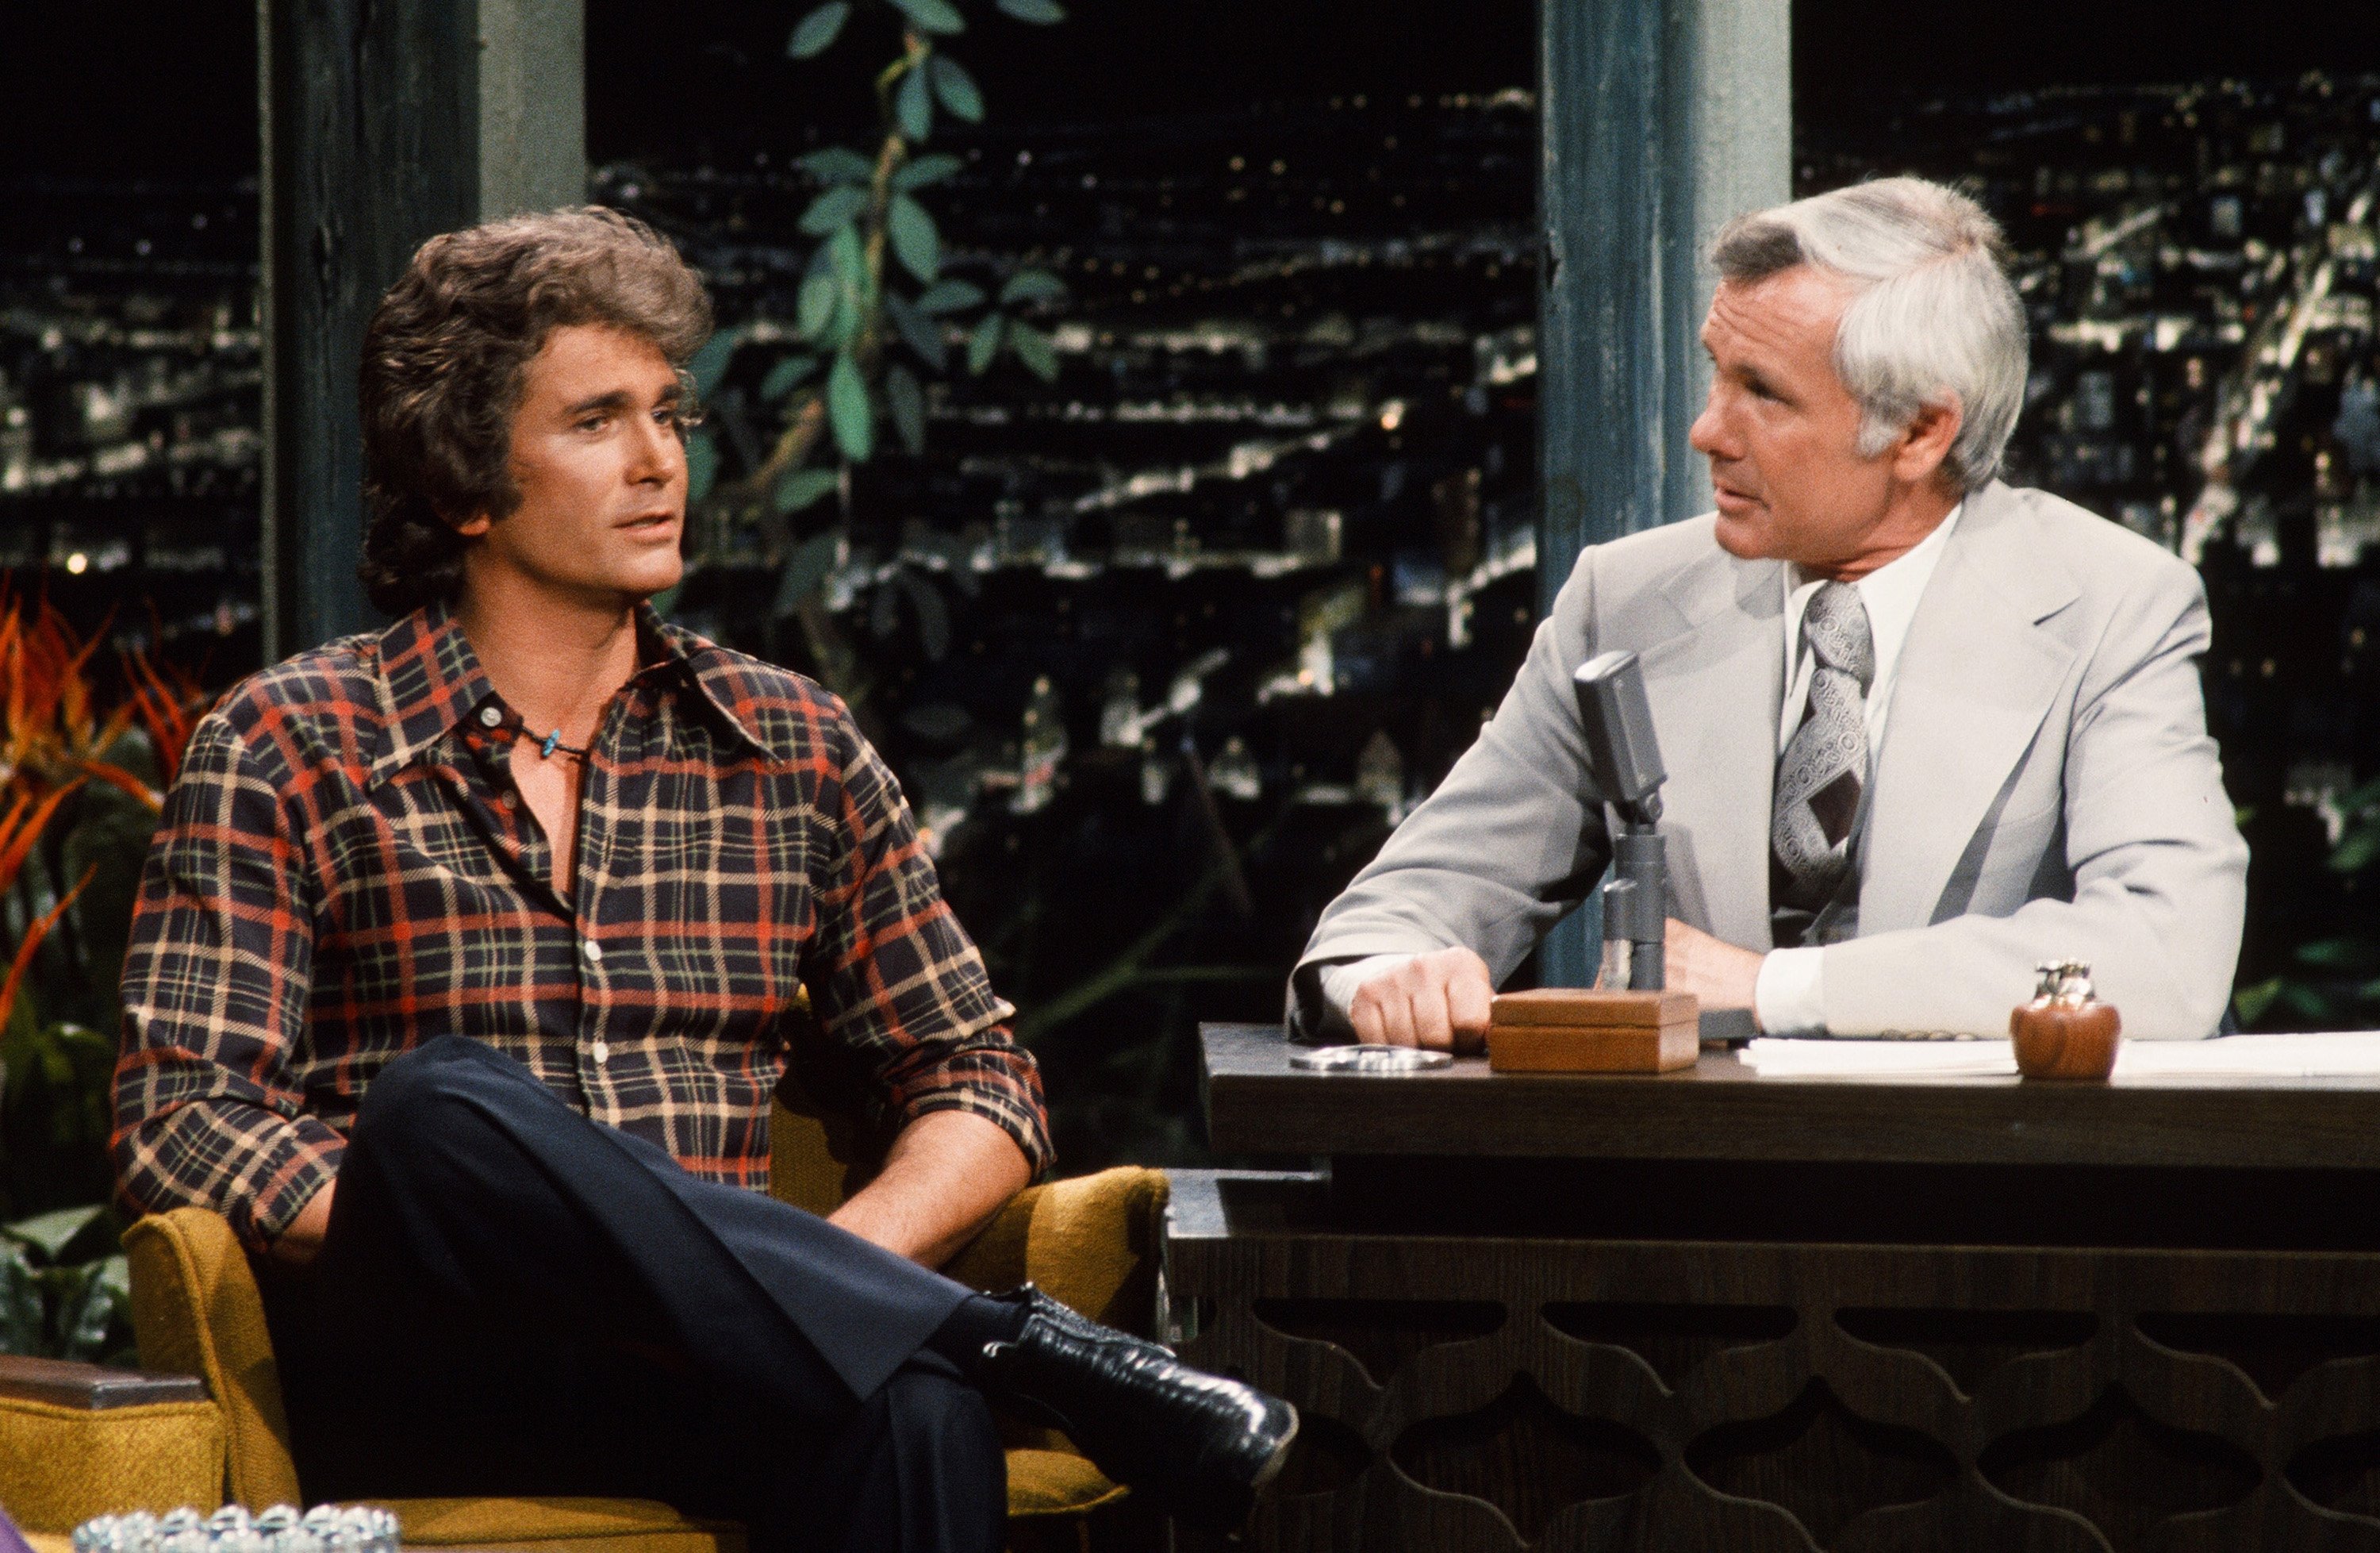 Michael Landon on The Tonight Show with Johnny Carson | Ron Tom/NBCU Photo Bank/NBCUniversal via Getty Images via Getty Images